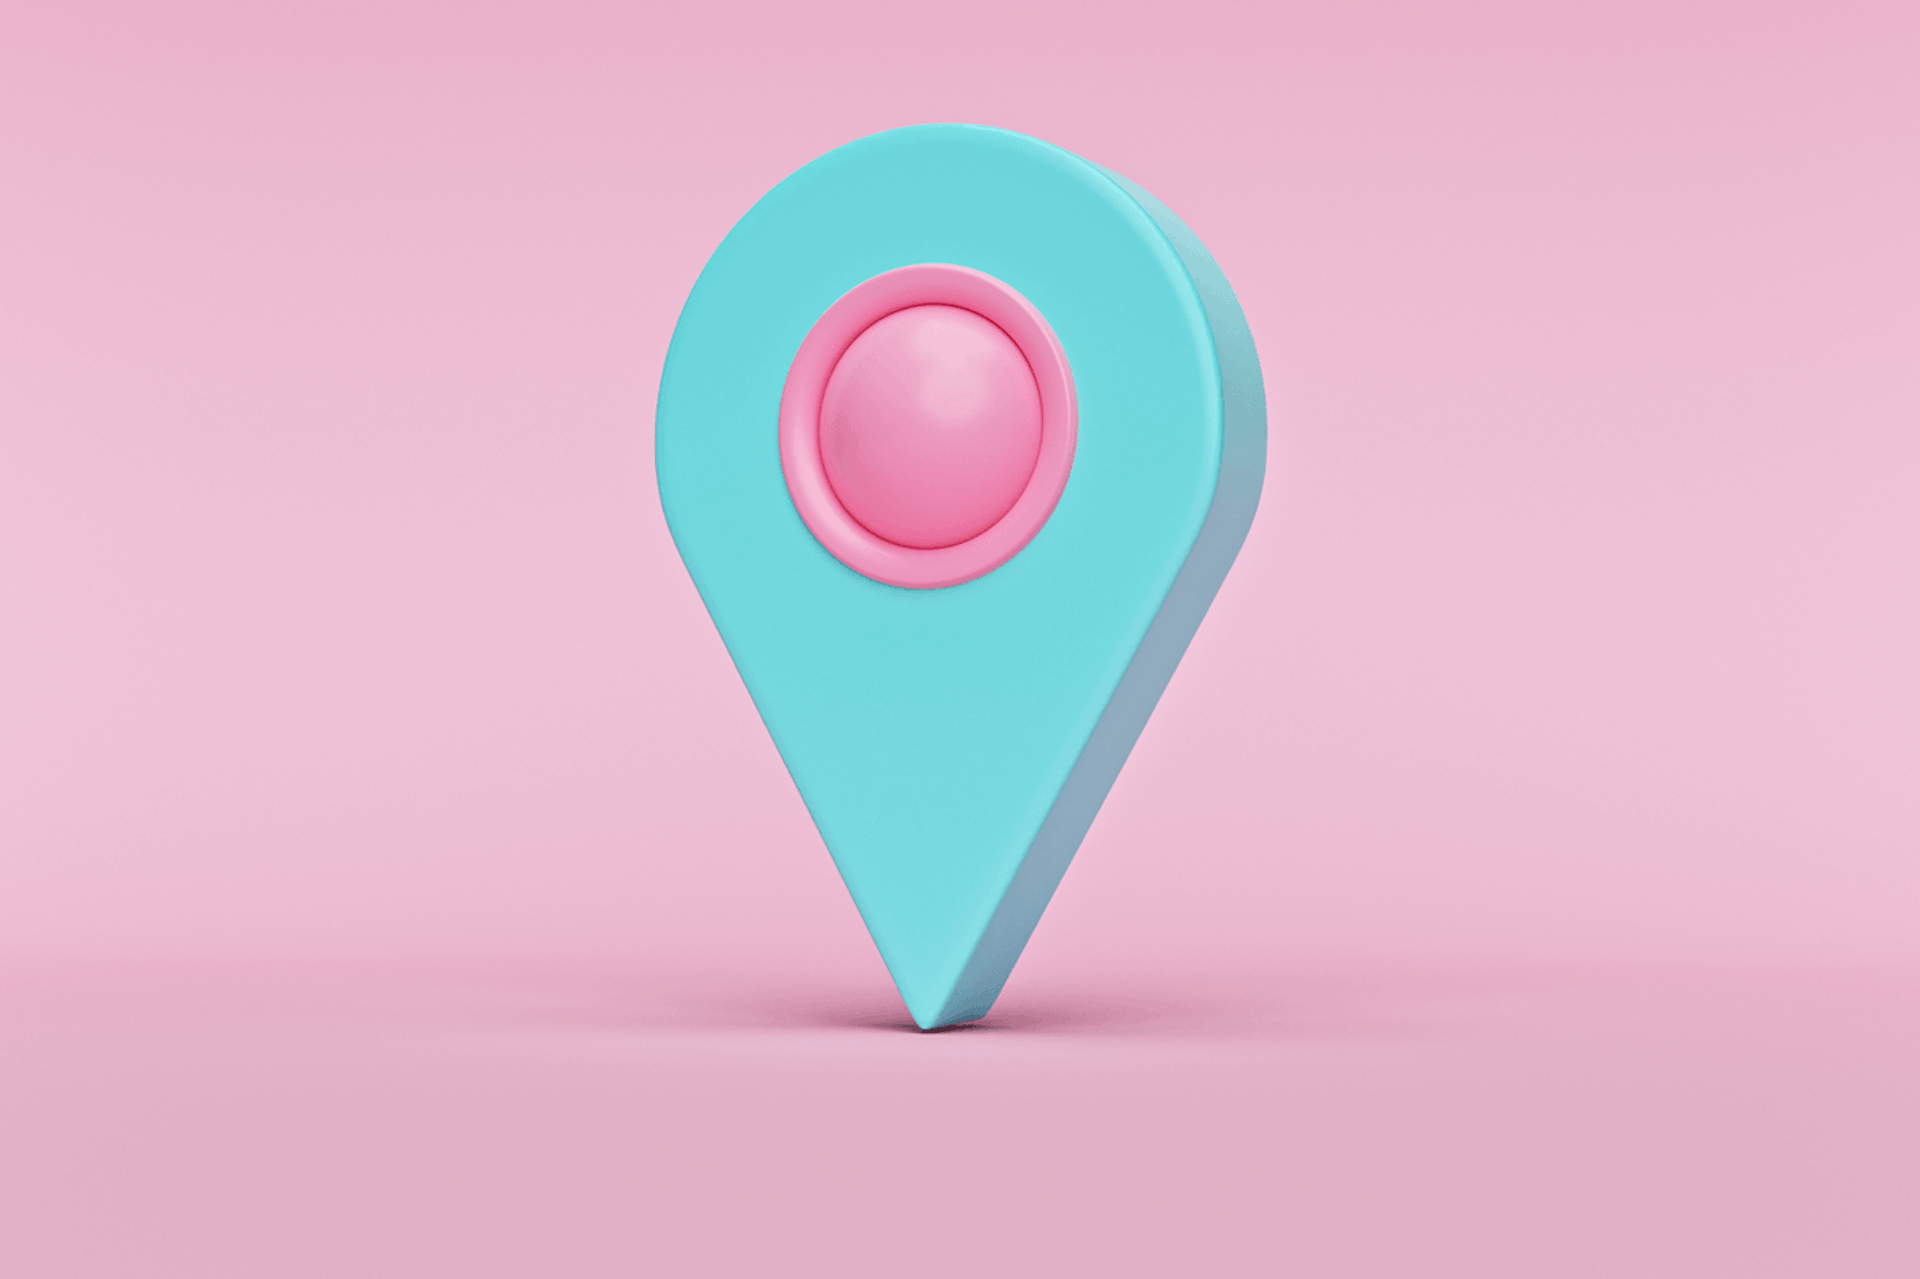 Illustration of a geolocation icon